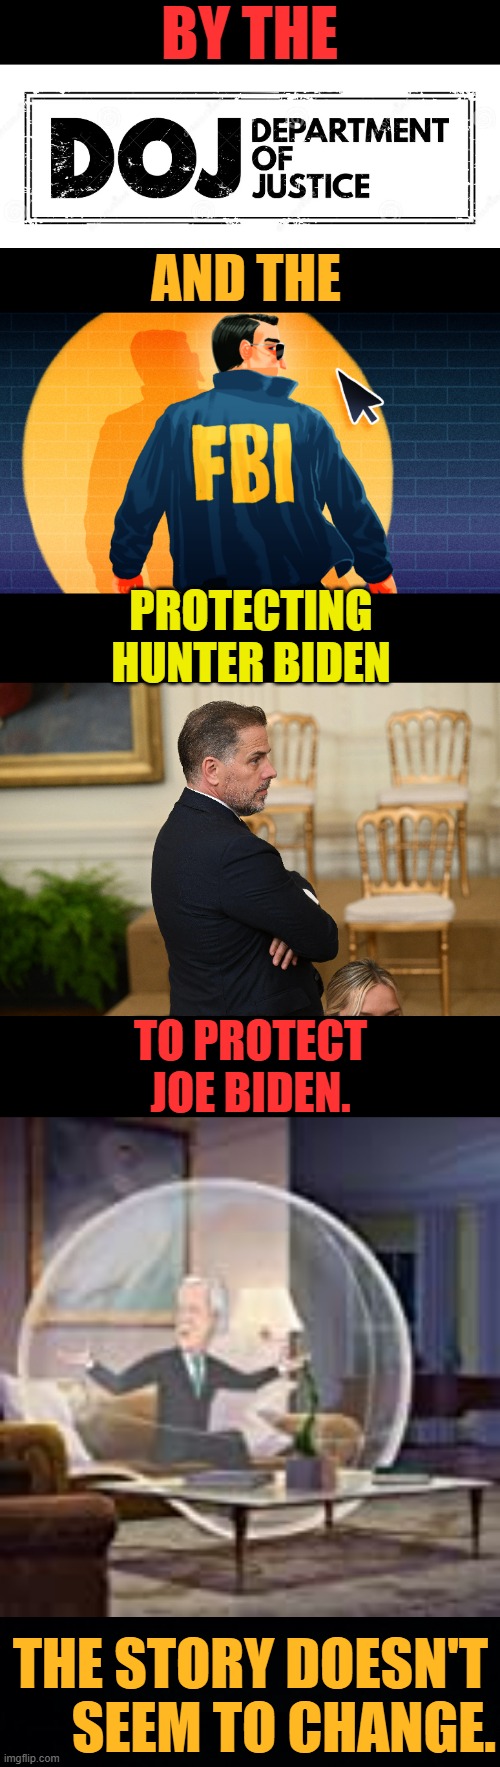 Protecting Joe Biden | BY THE; AND THE; PROTECTING HUNTER BIDEN; TO PROTECT JOE BIDEN. THE STORY DOESN'T       SEEM TO CHANGE. | image tagged in memes,politics,doj,protection,hunter biden,joe biden | made w/ Imgflip meme maker